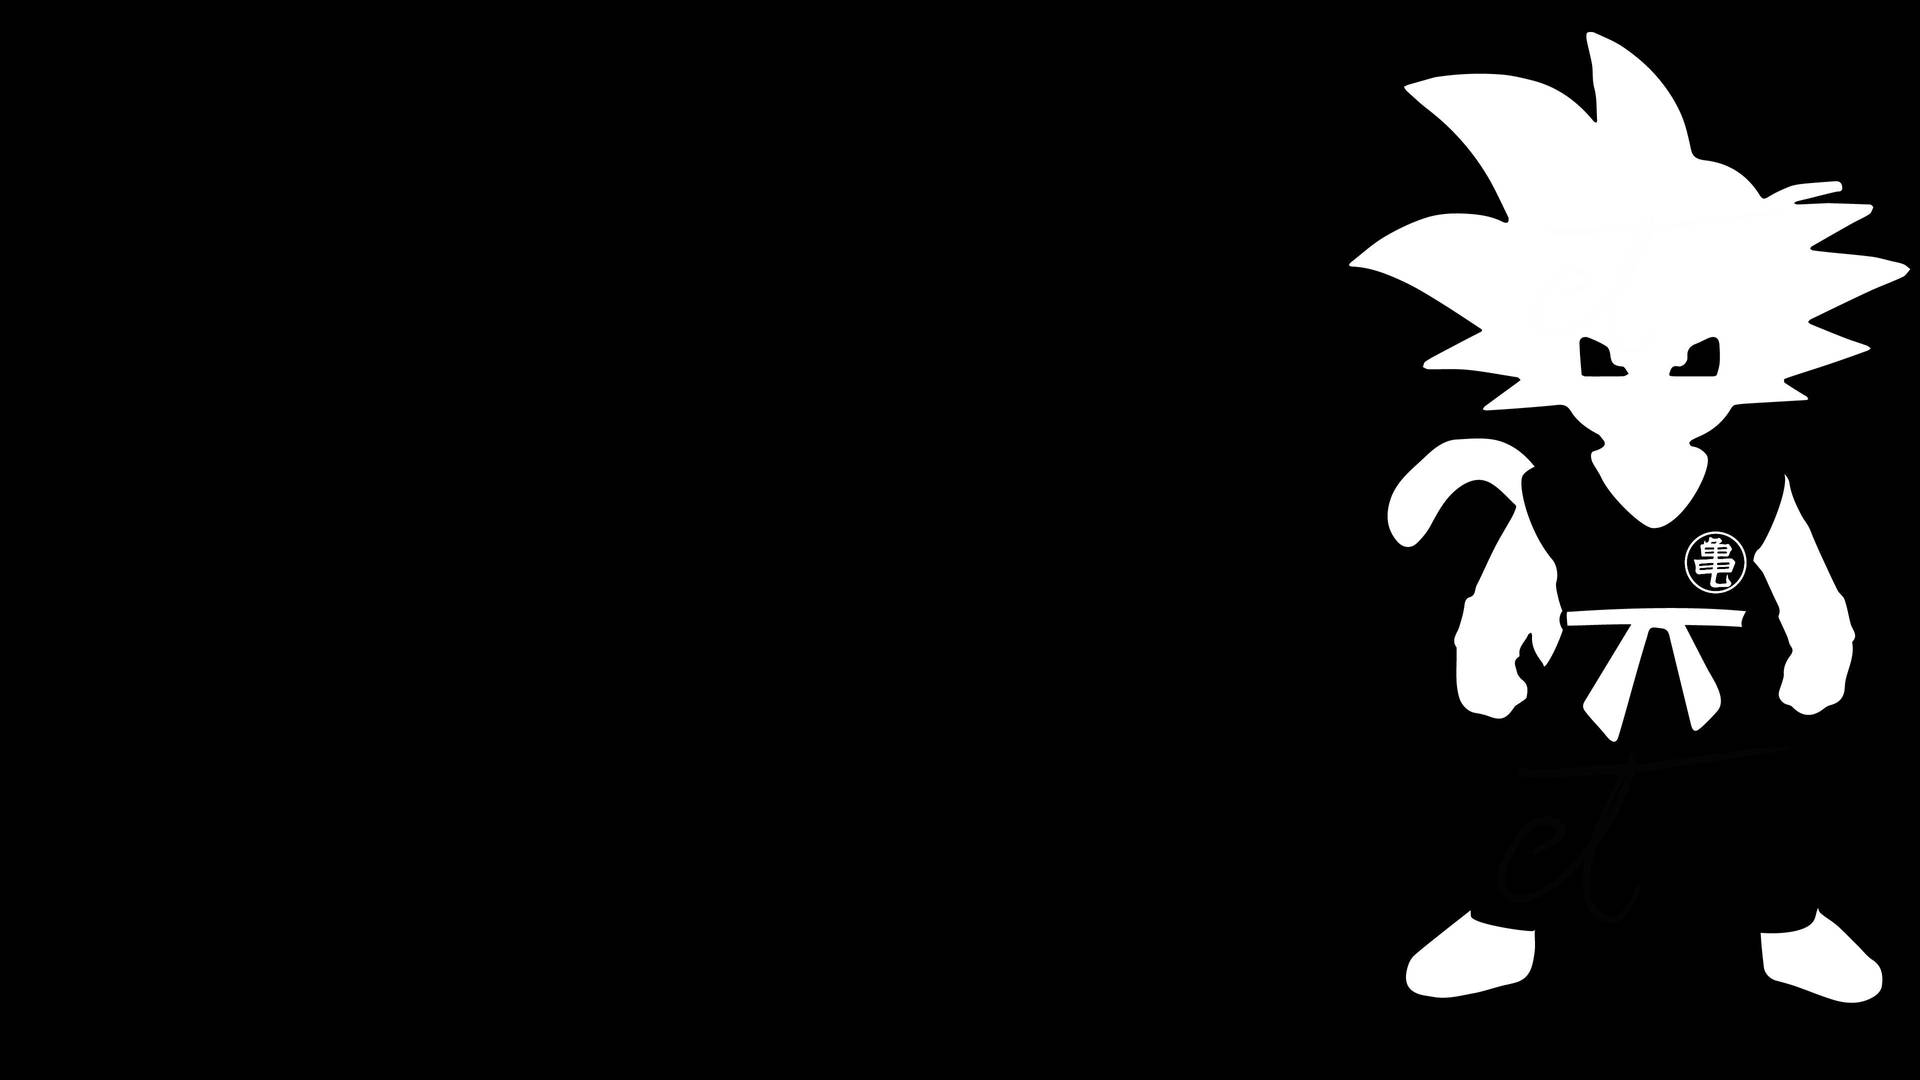 The Power of Goku Black and White Wallpaper